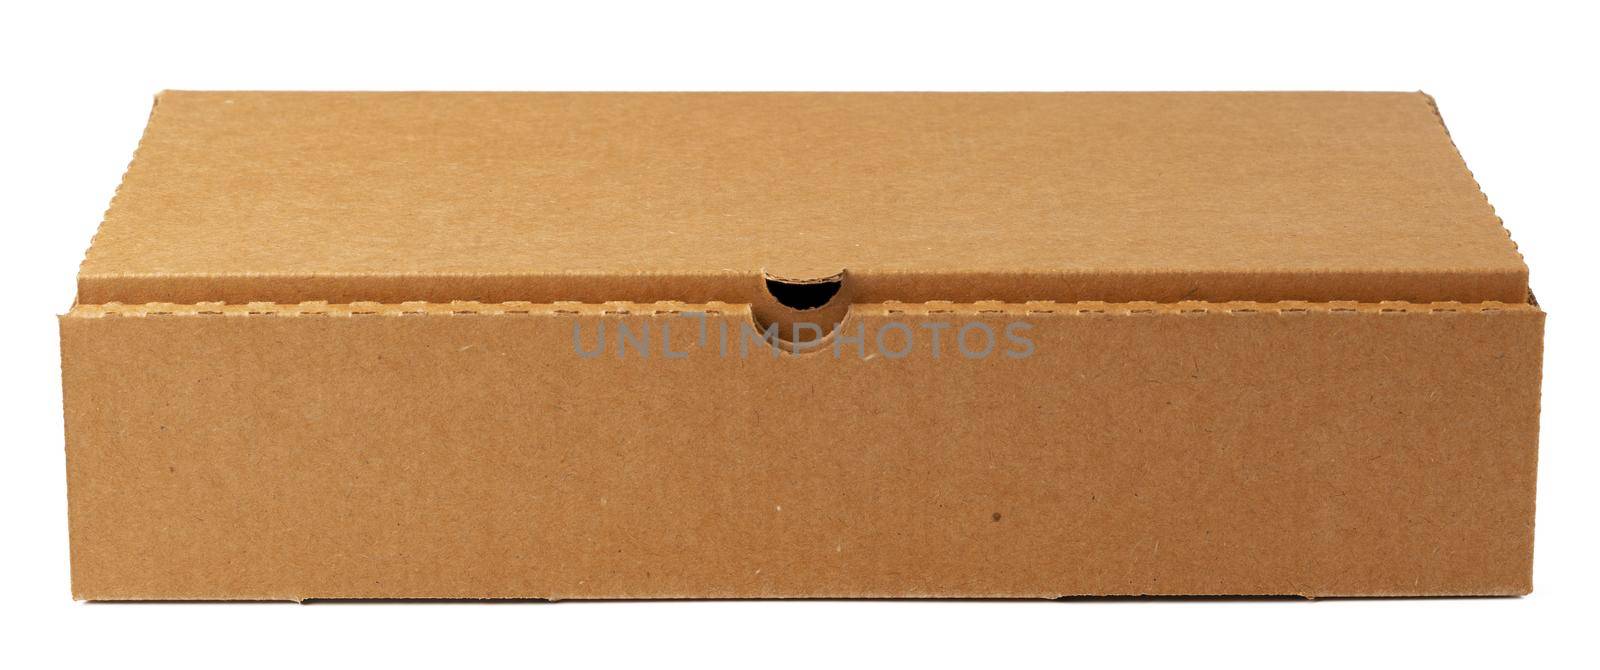 Brown cardboard box isolated on white background, close up